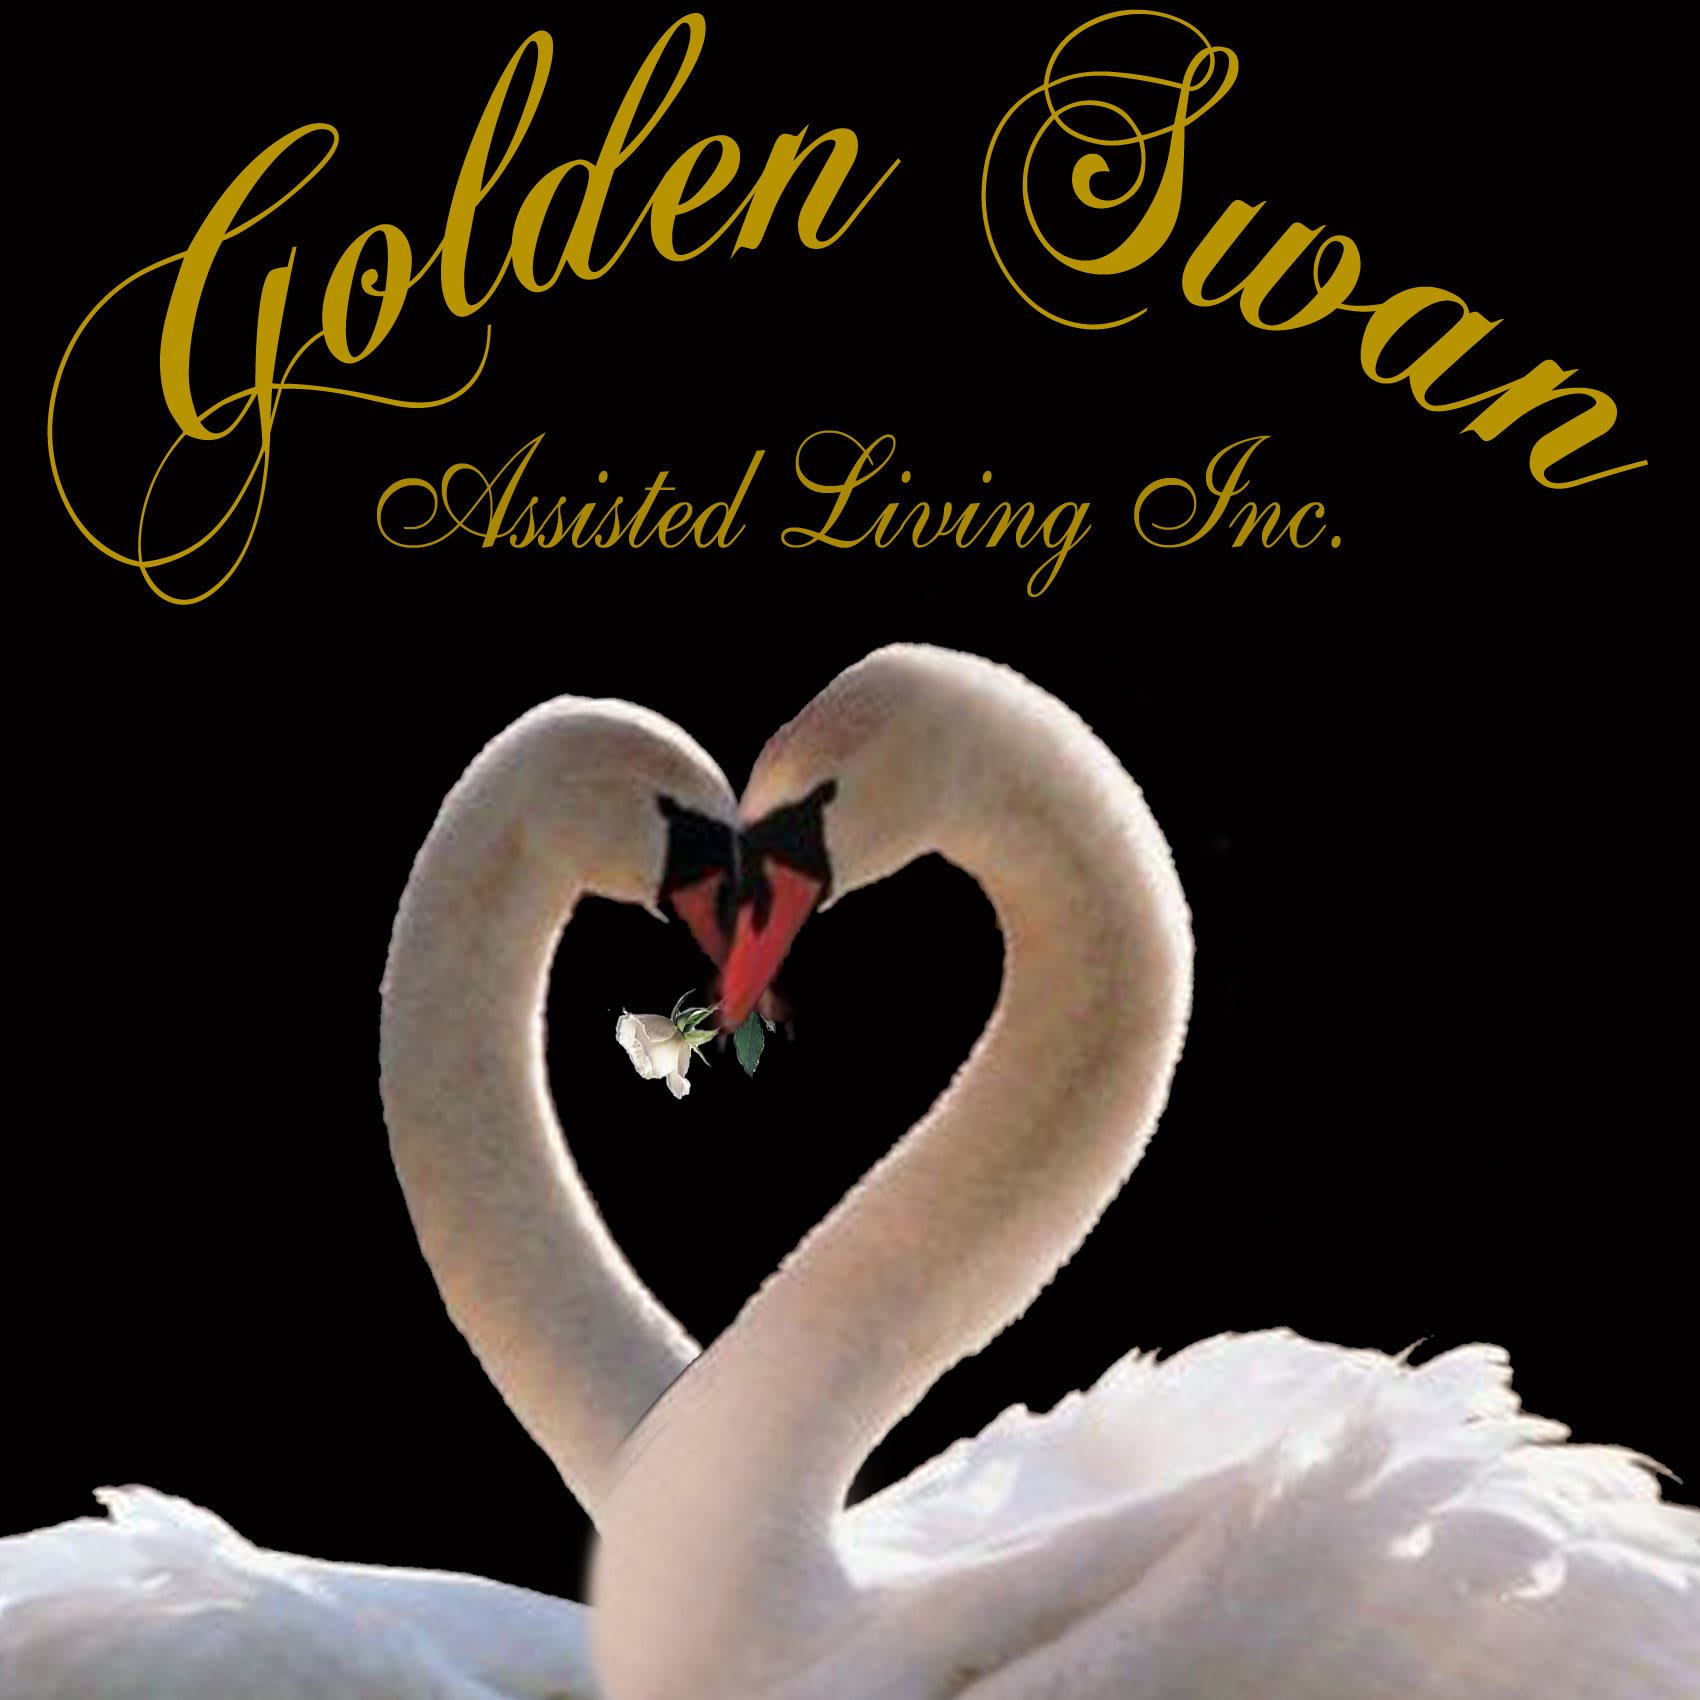 Golden Swan of Boca Assisted Living and Memory Care